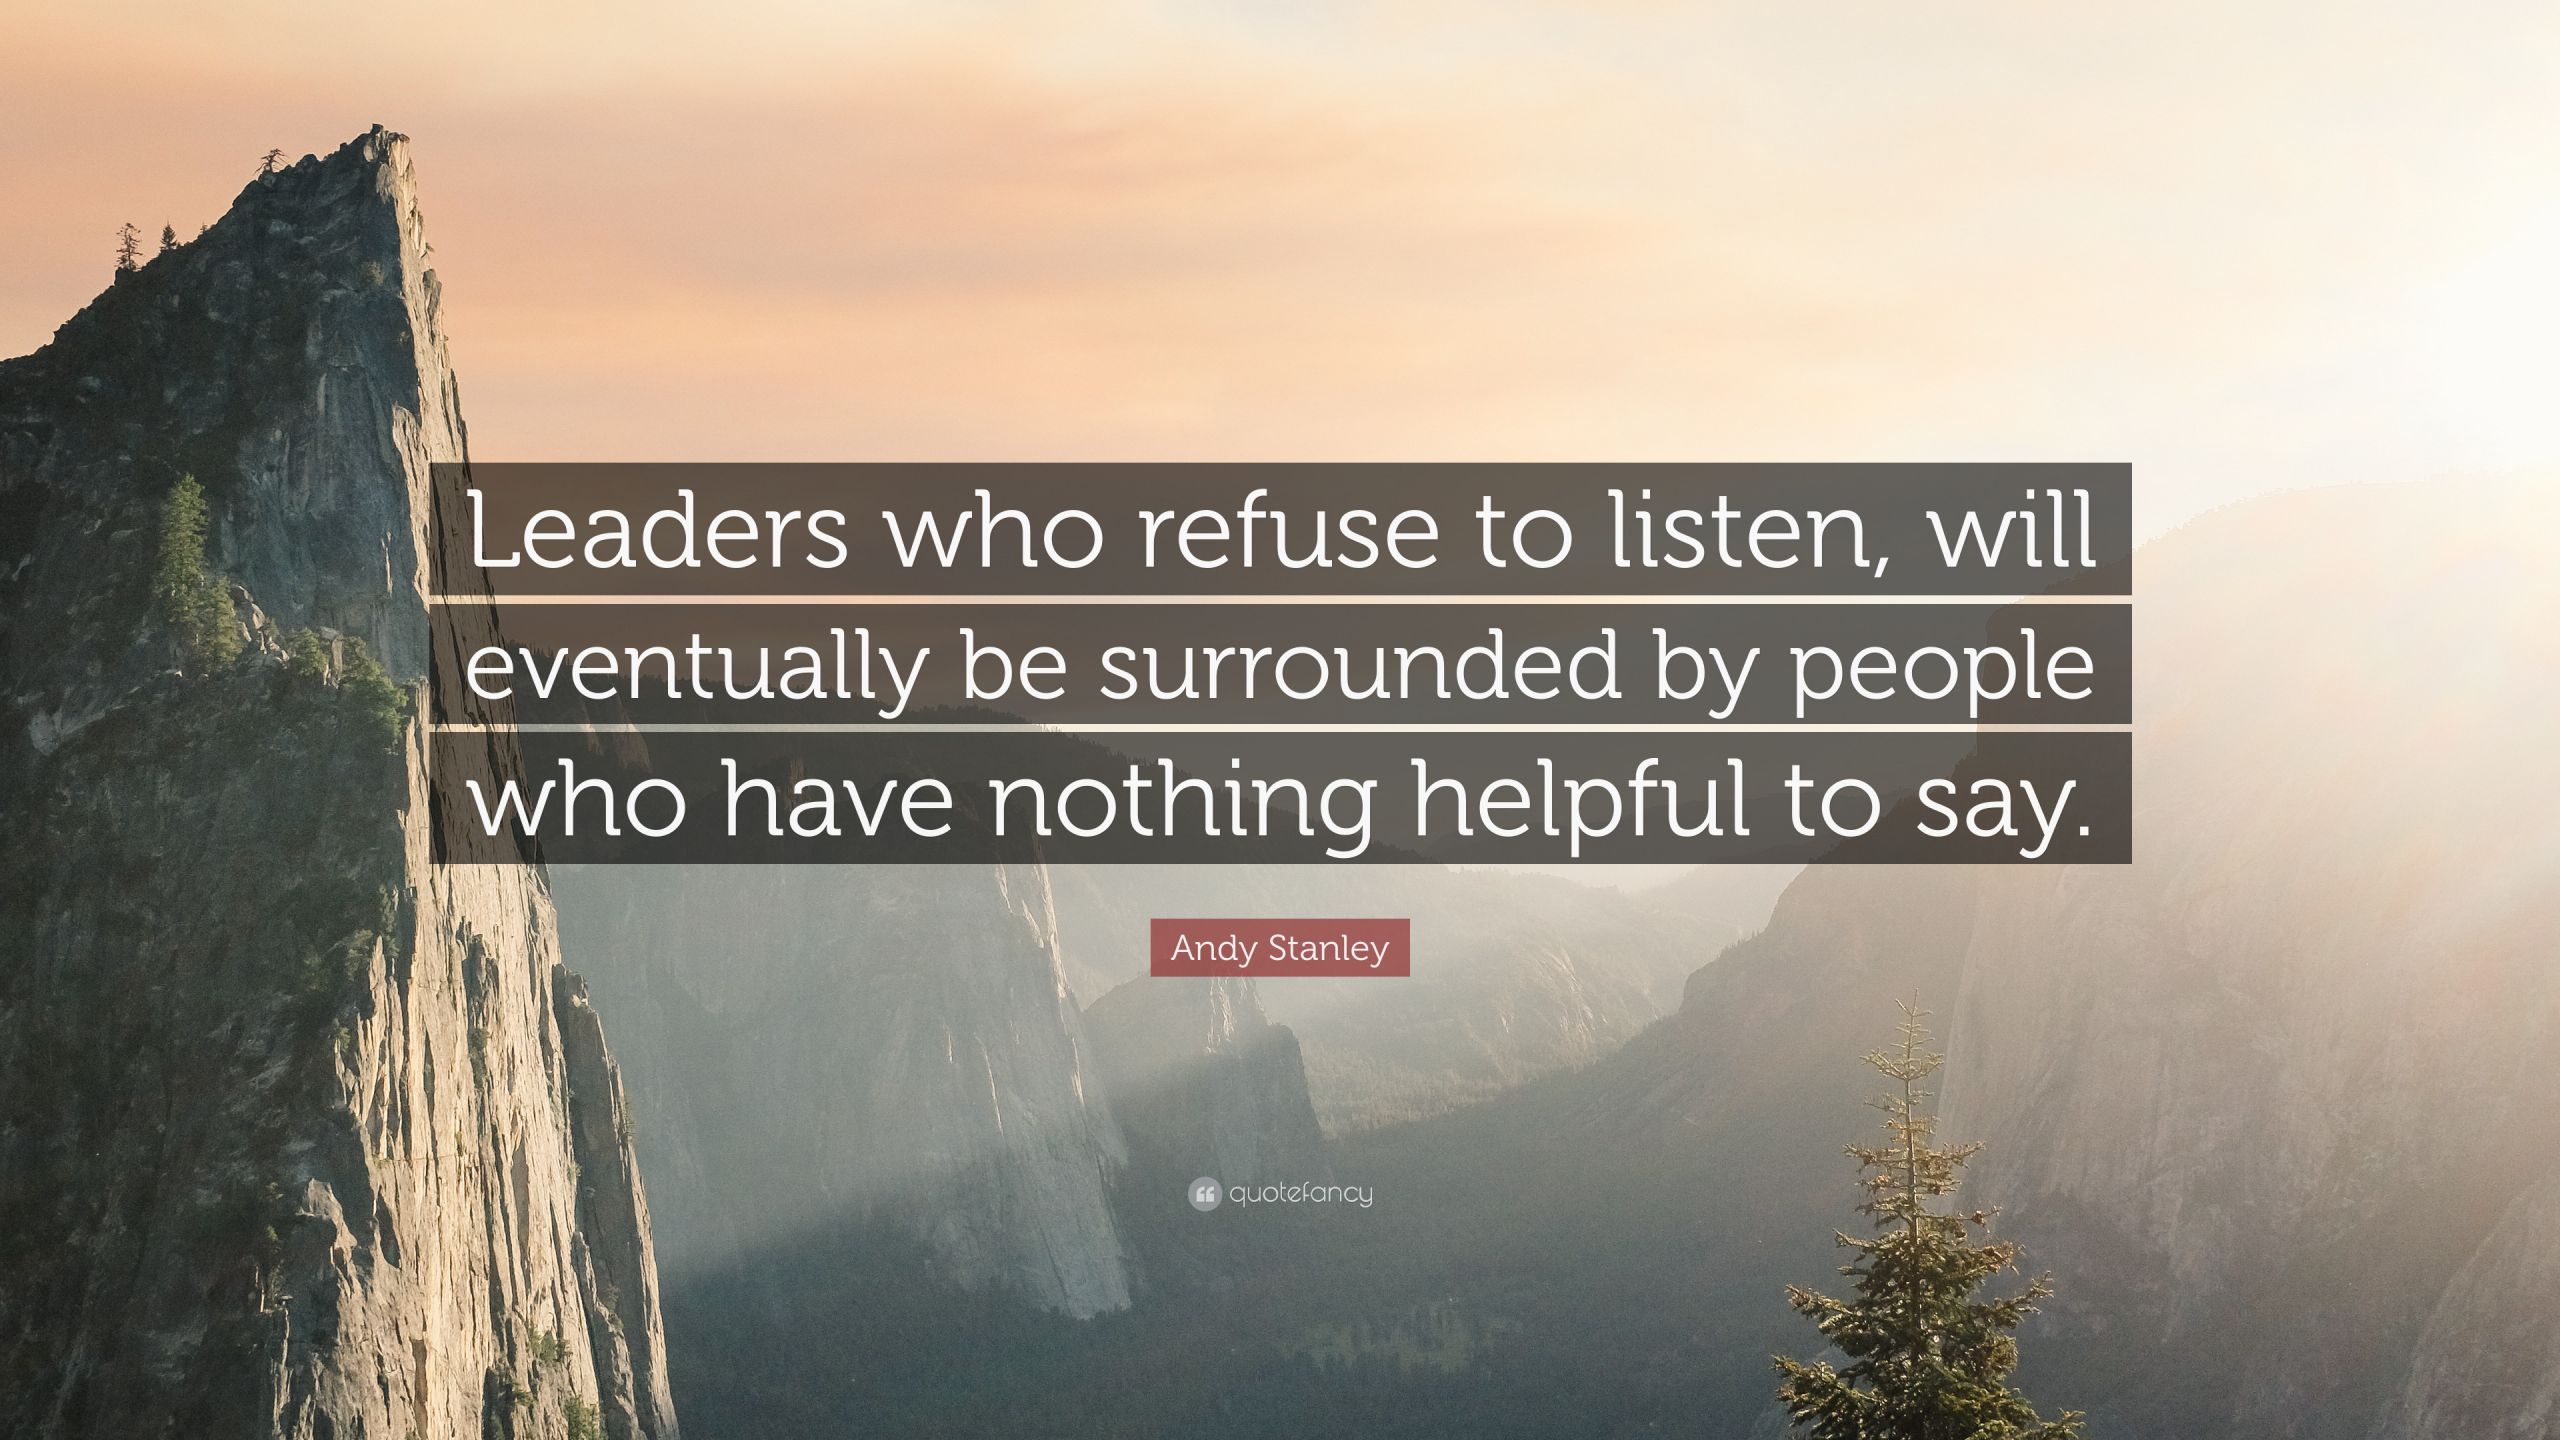 Andy Stanley Leadership Quotes
 Andy Stanley Quote “Leaders who refuse to listen will